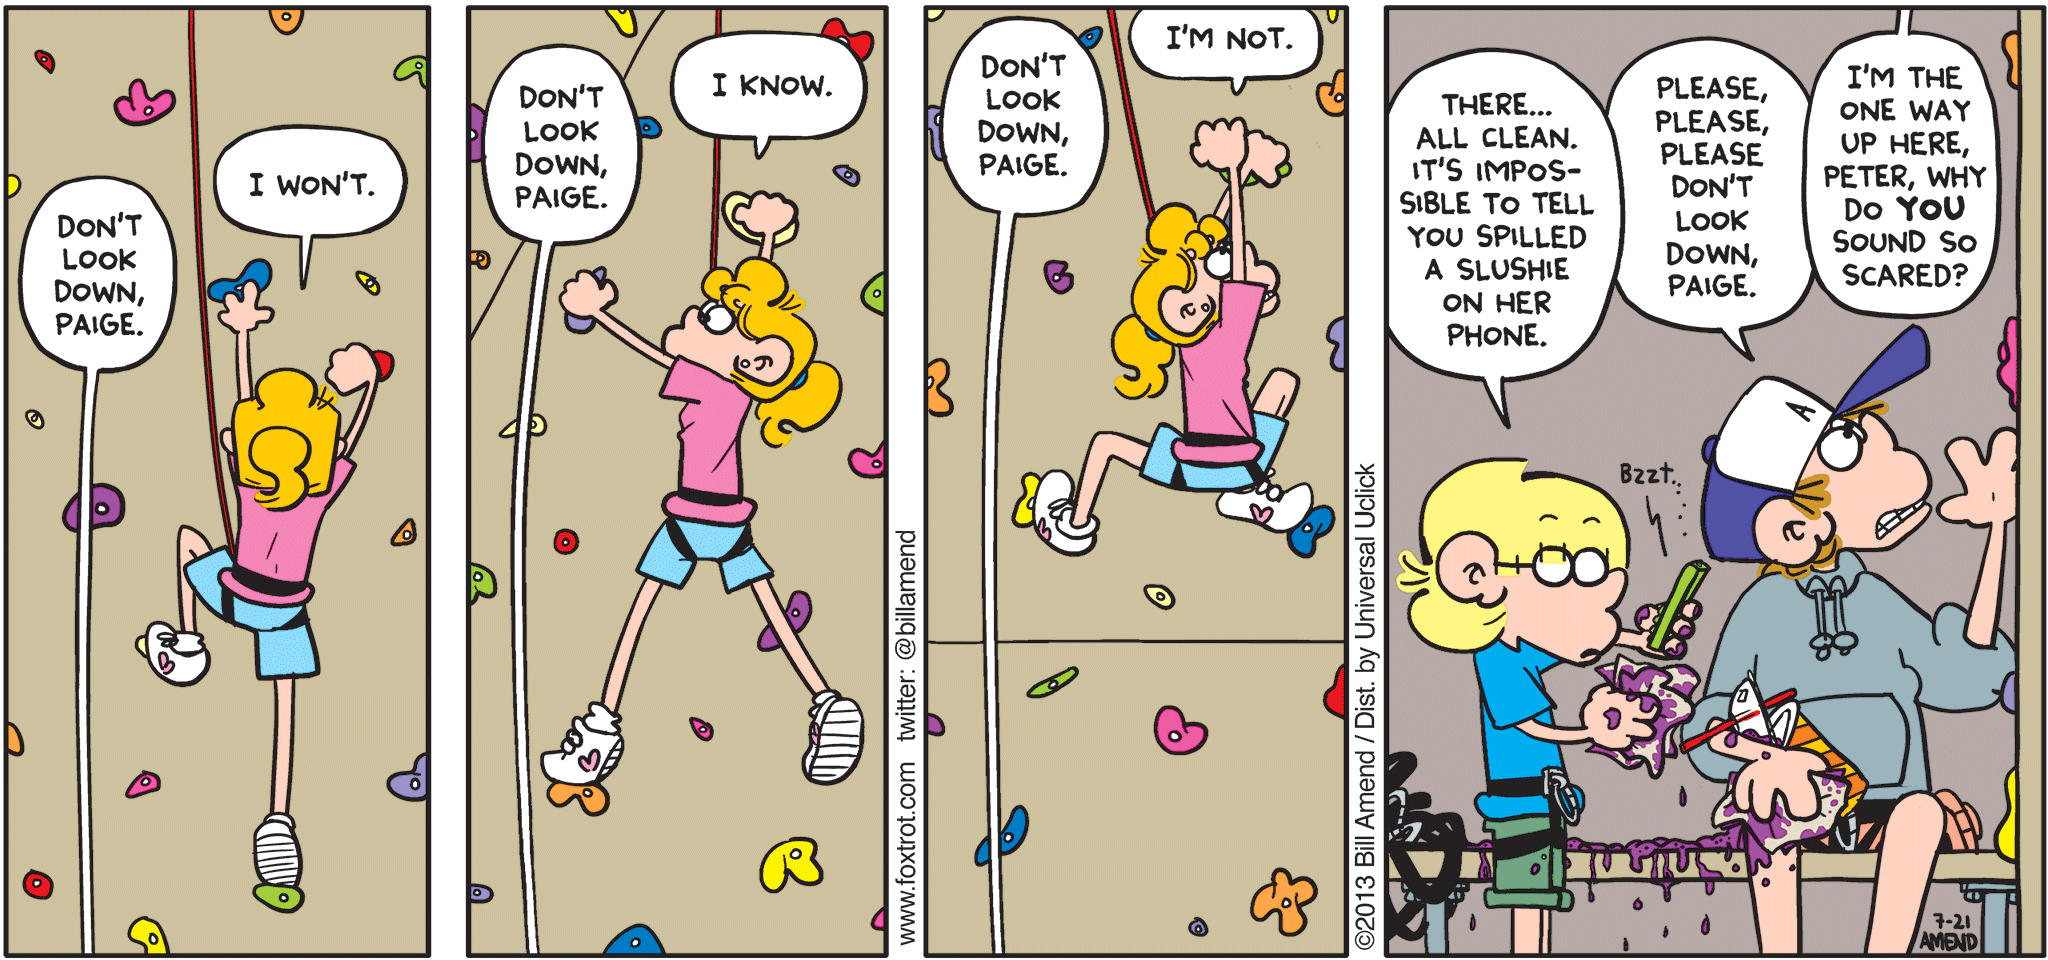 FoxTrot by Bill Amend - "Don't Look Down!" published July 21, 2013 - Peter: Don't look down, Paige. Paige: I won't. Peter: Don't look down, Paige. Paige: I know. Peter: Don't look down, Paige. Paige: I'm not. Jason: There...all clean. It's impossible to tell you spilled a slushie on her phone. Peter: Please, please, please don't look down, Paige. Paige: I'm the one up here, Peter. Why do YOU sound so scared?